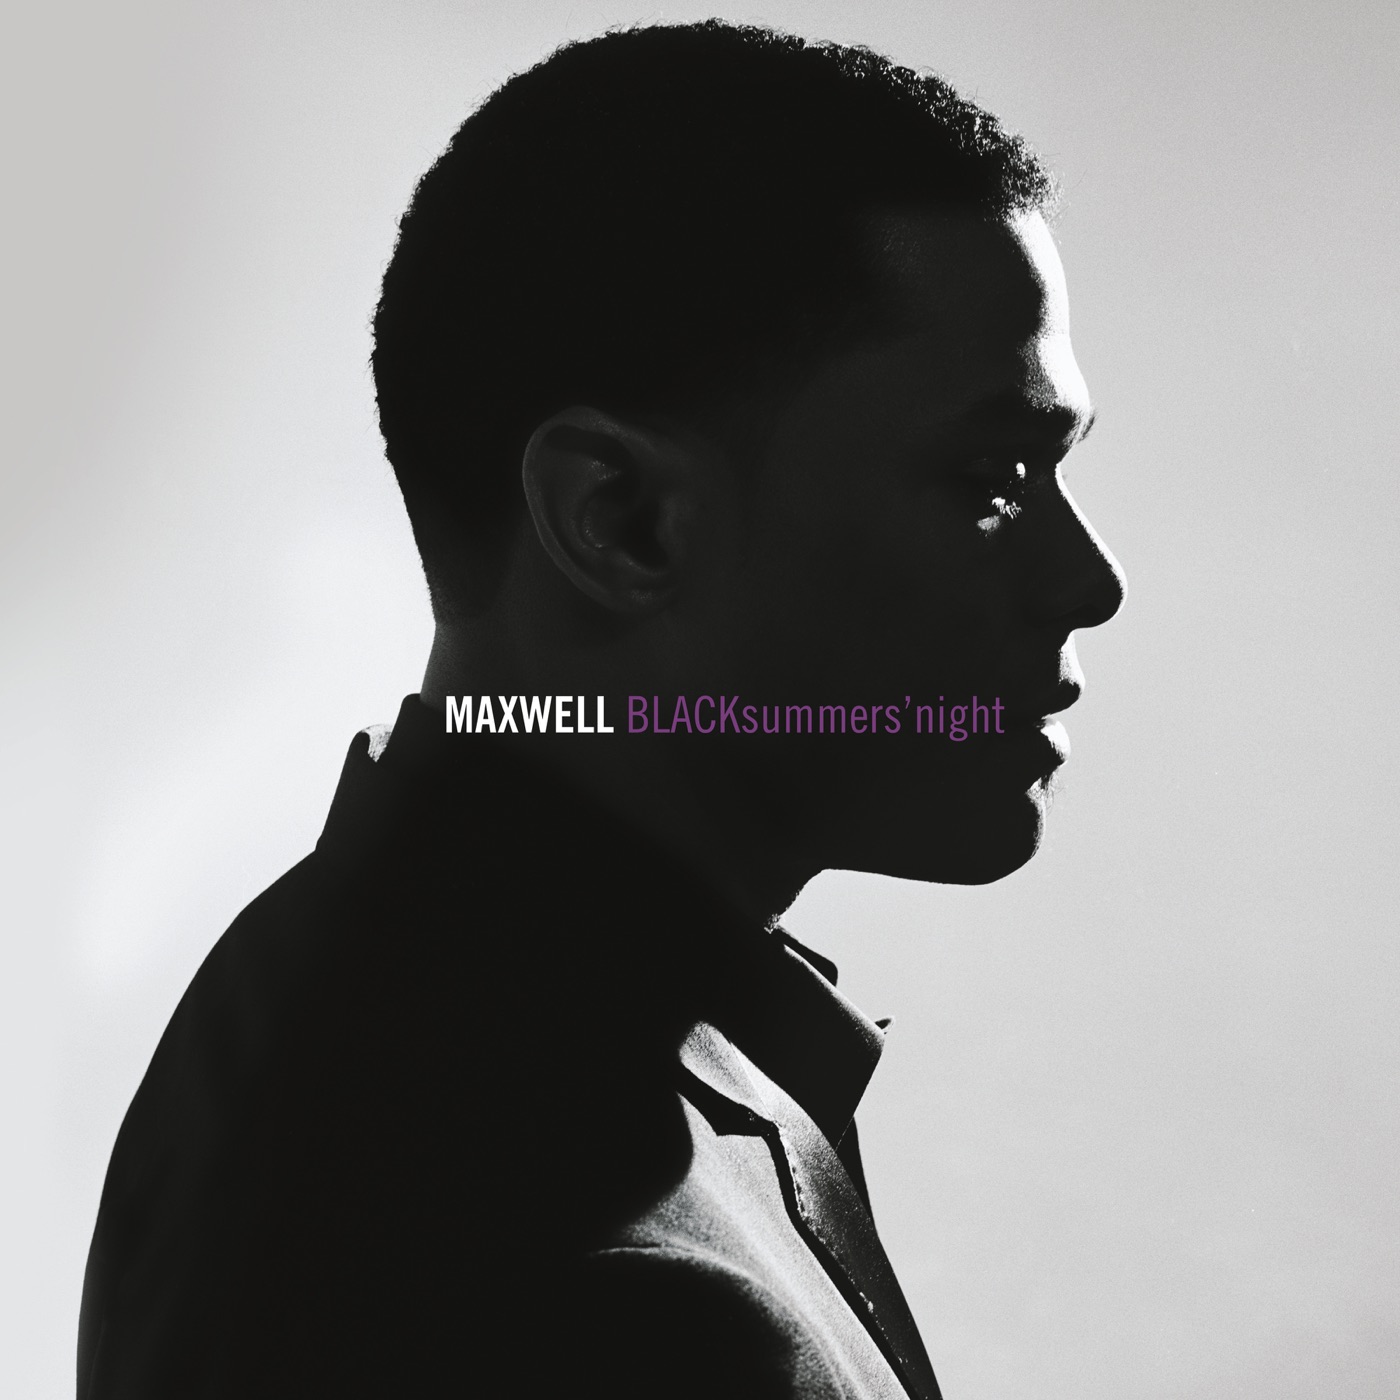 BLACKsummers'night (2009) by Maxwell